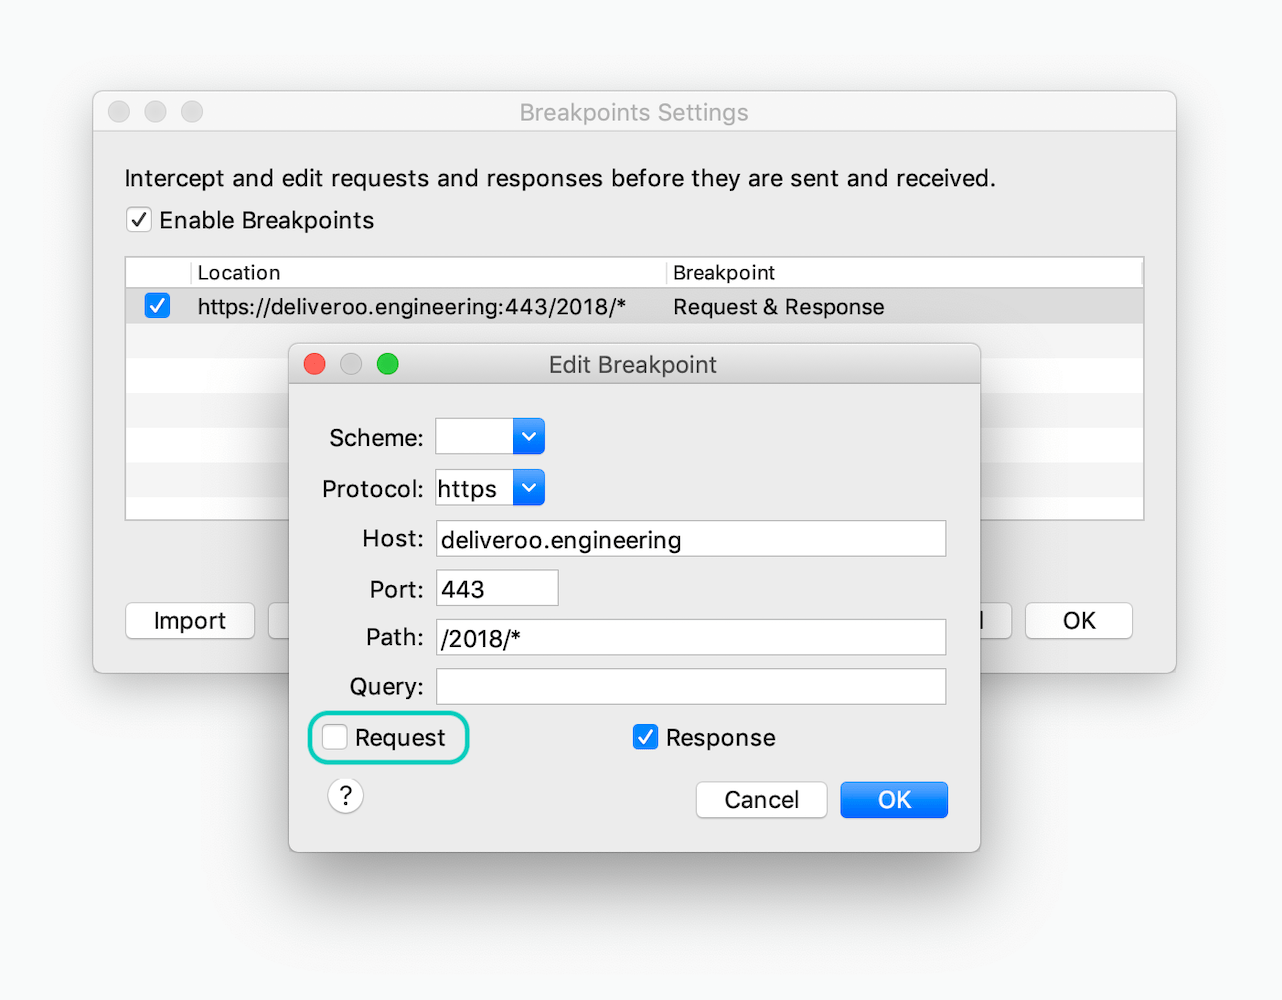 Edit Breakpoint dialog to uncheck Request option